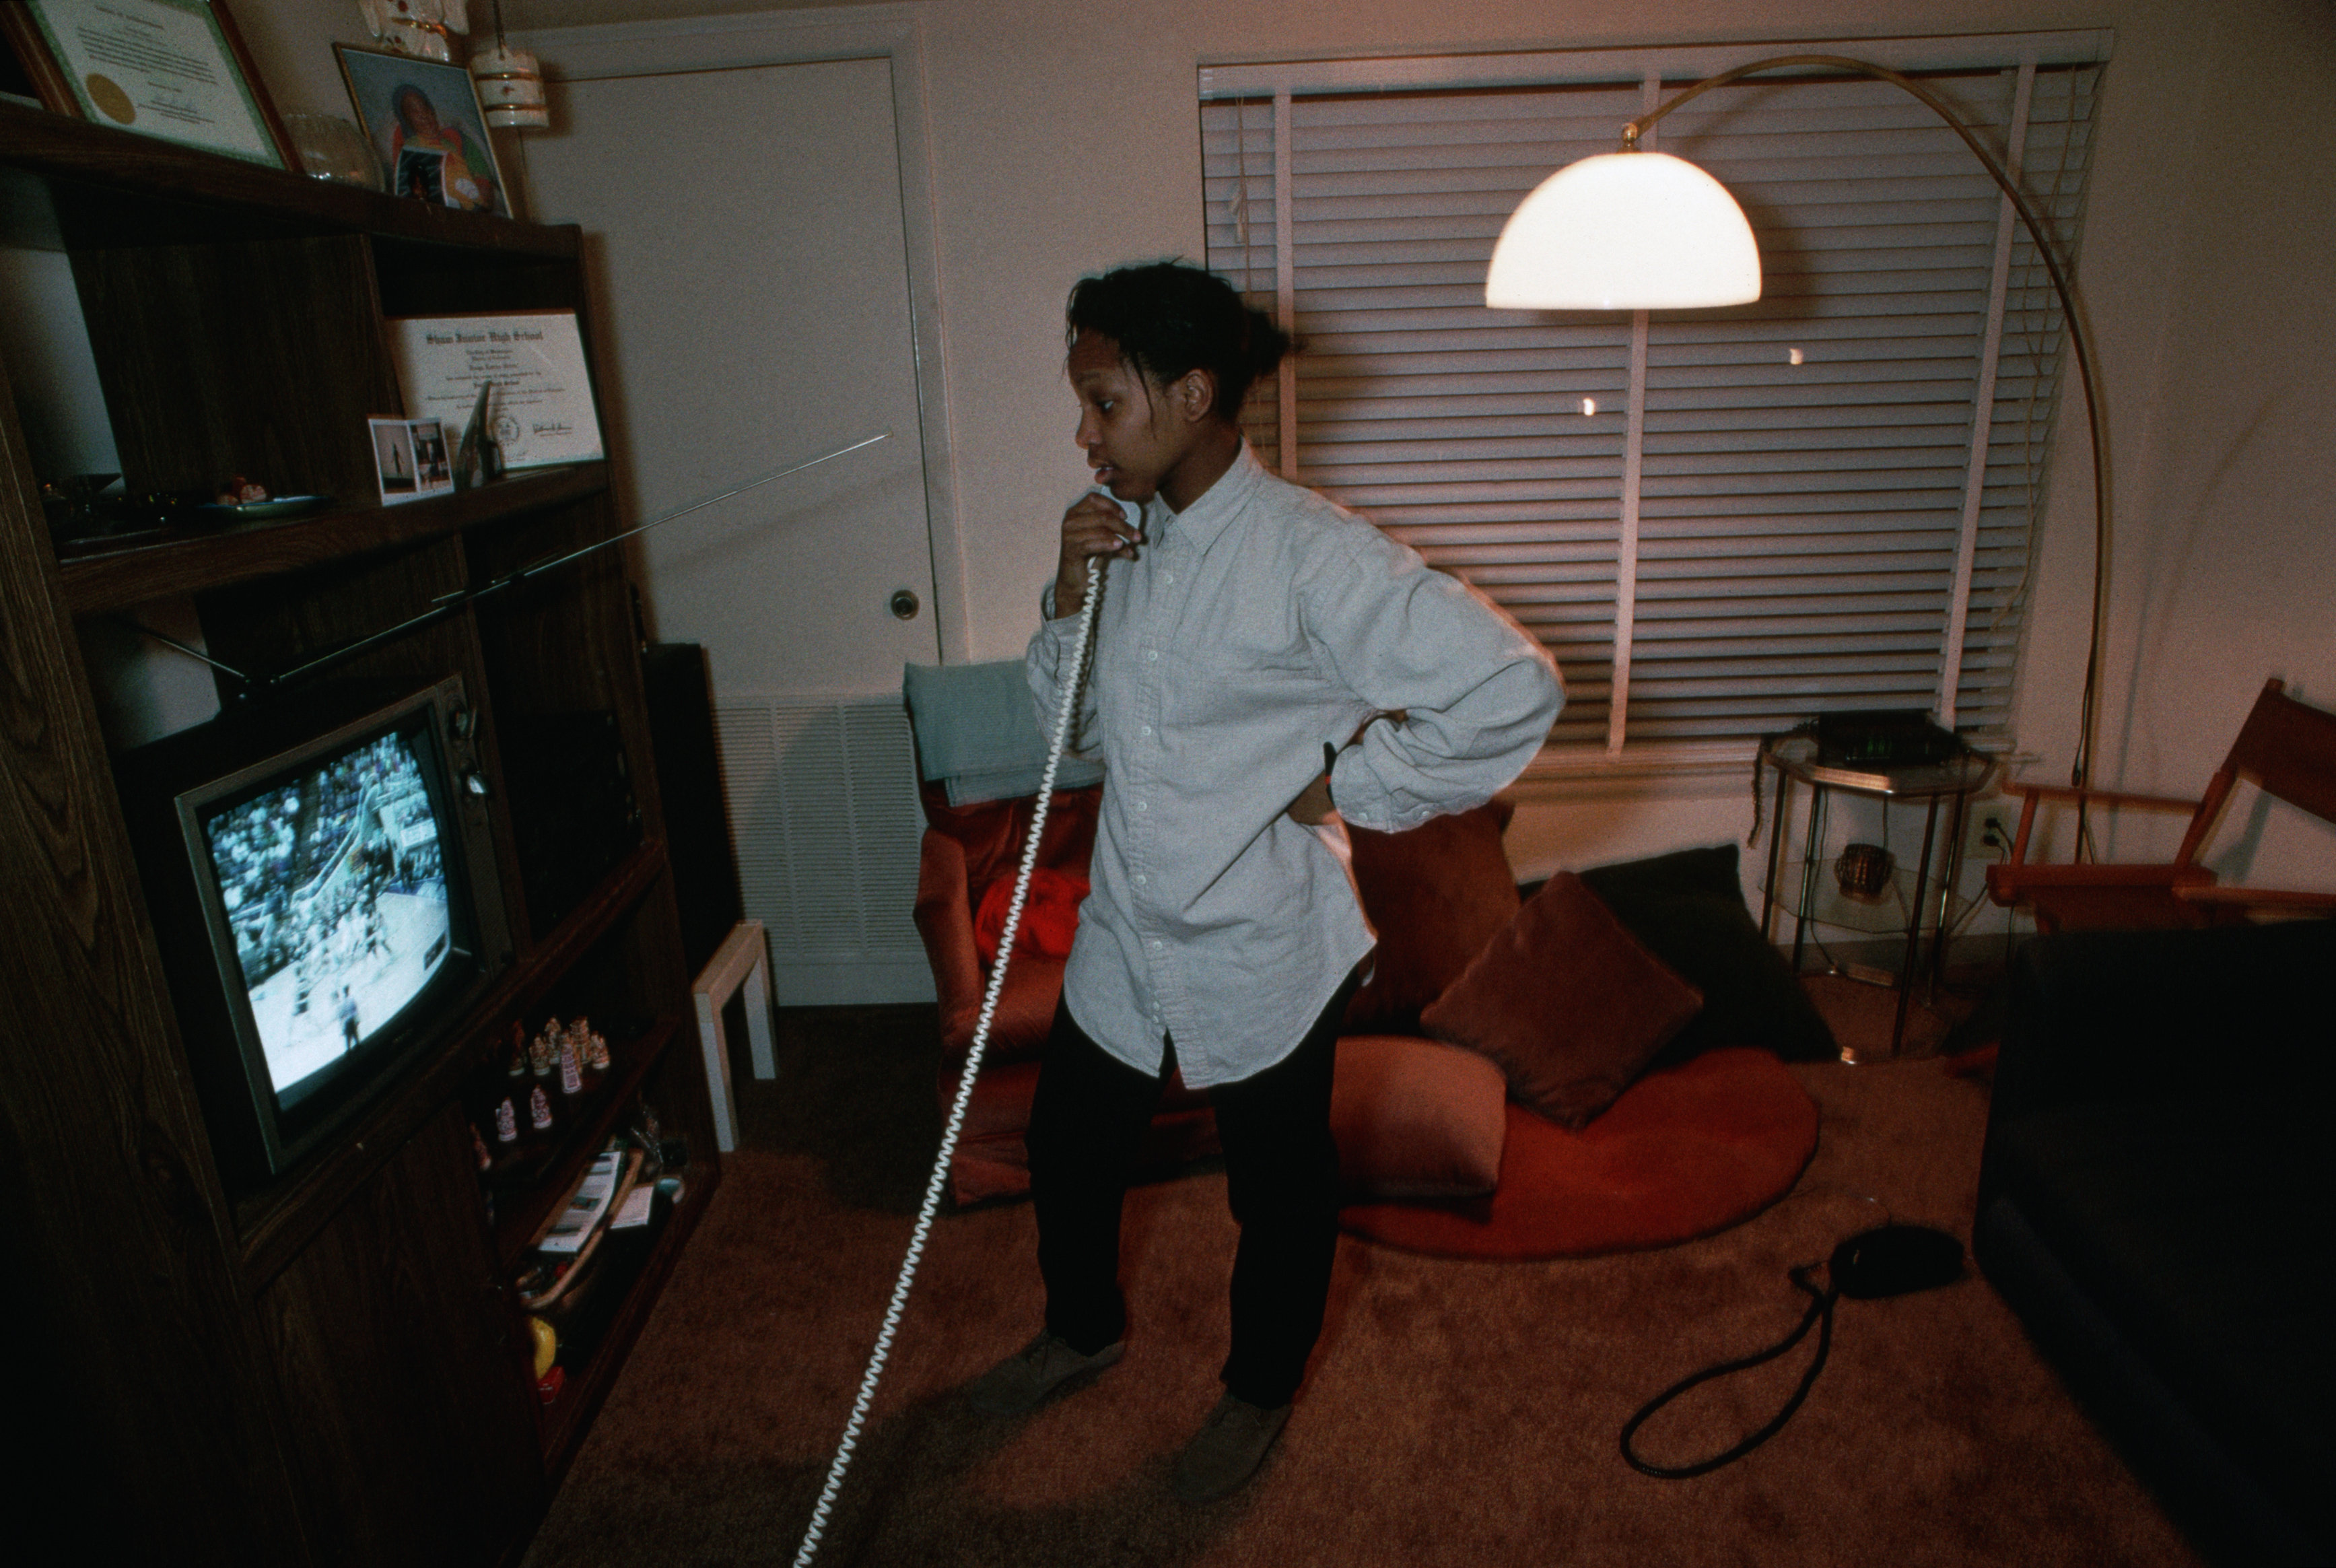 A woman is talking on a corded phone while watching TV